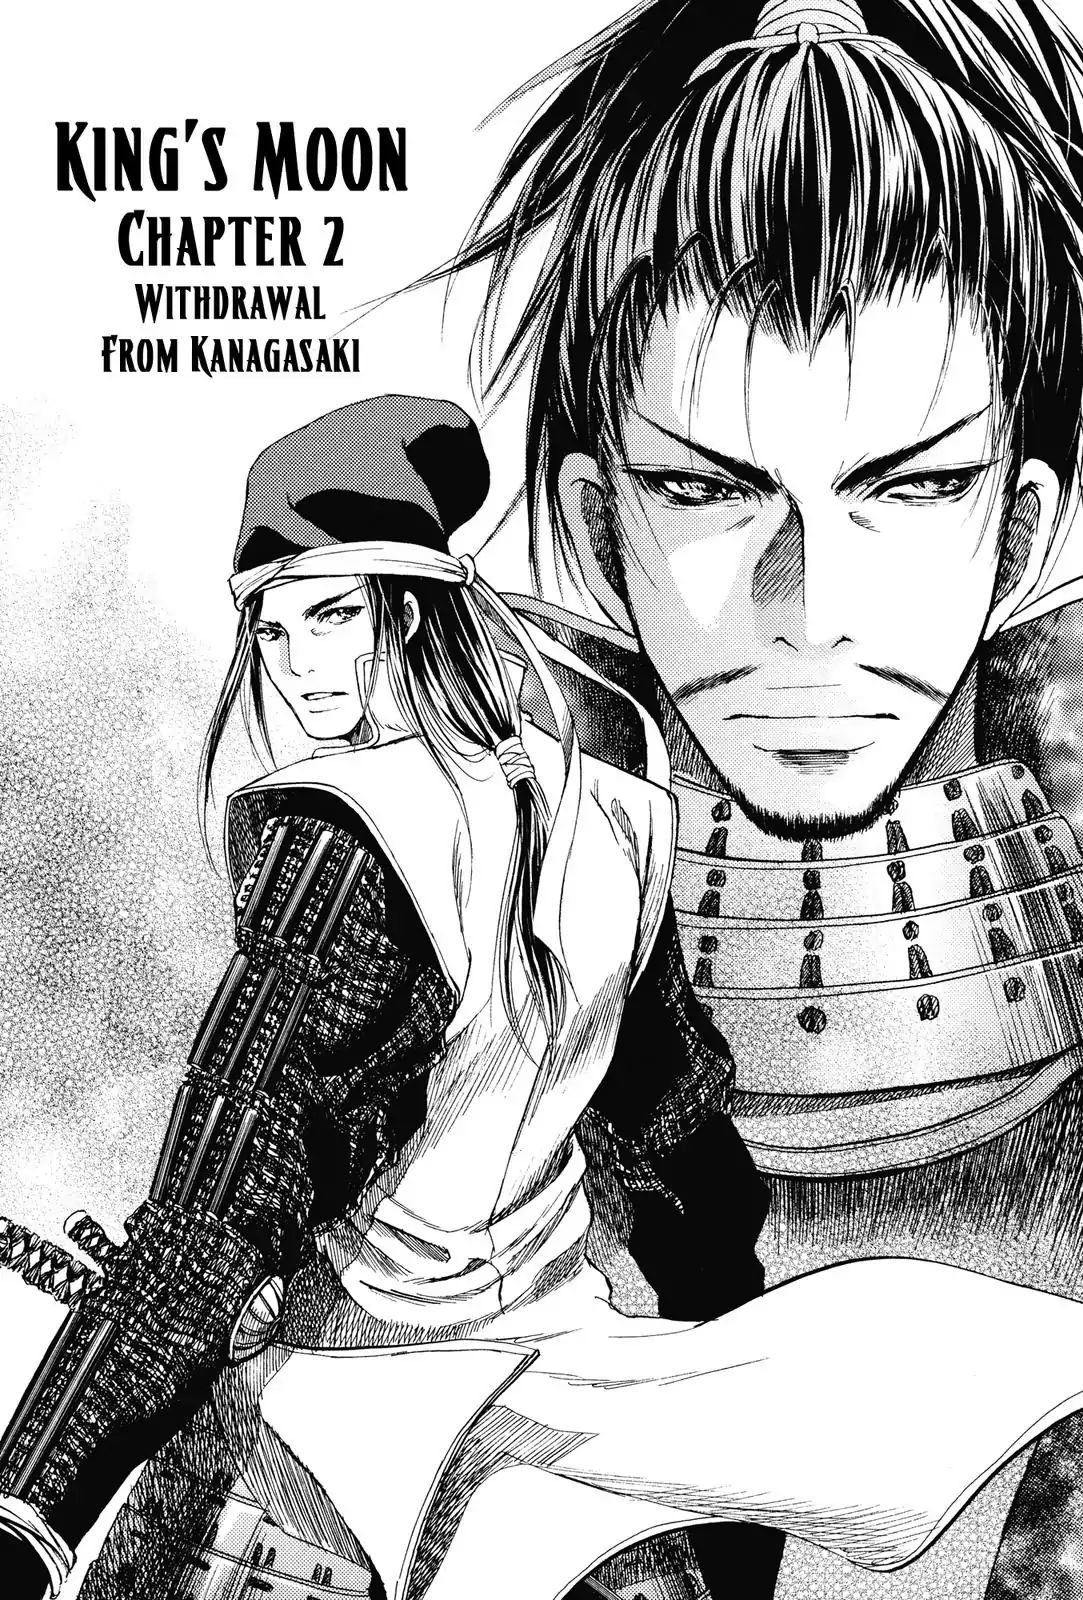 King's Moon - The Life Of Akechi Mitsuhide Chapter 2 #1